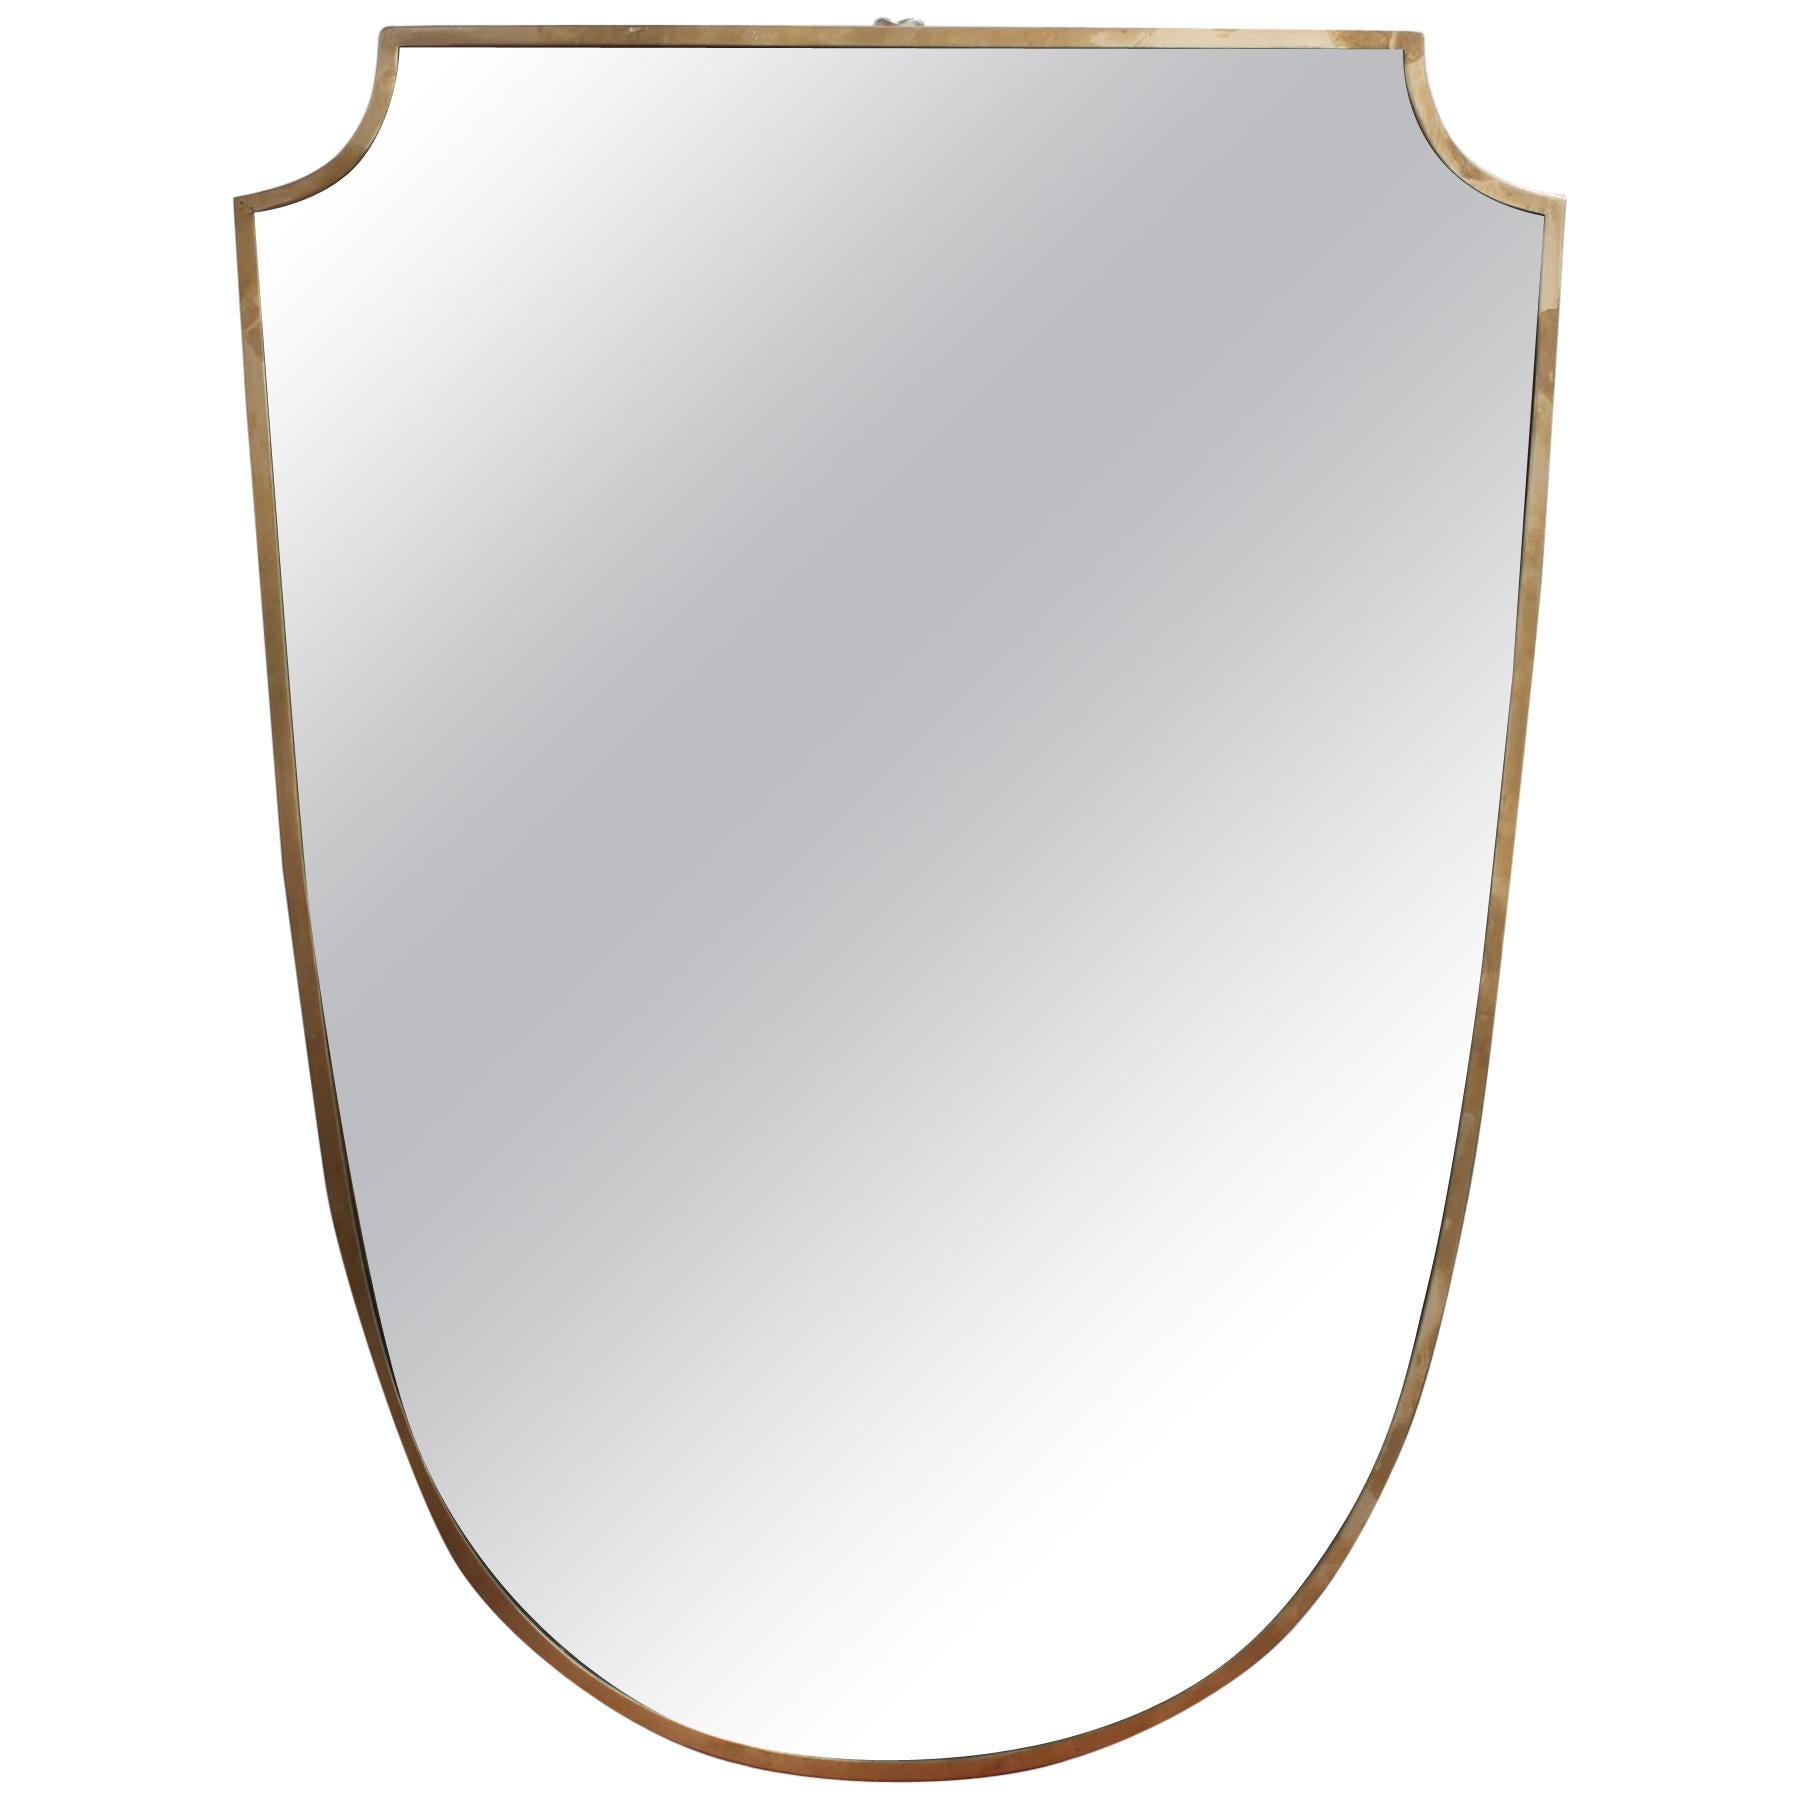 Midcentury Italian Crest-Shaped Wall Mirror with Brass Frame, 1950s, Large